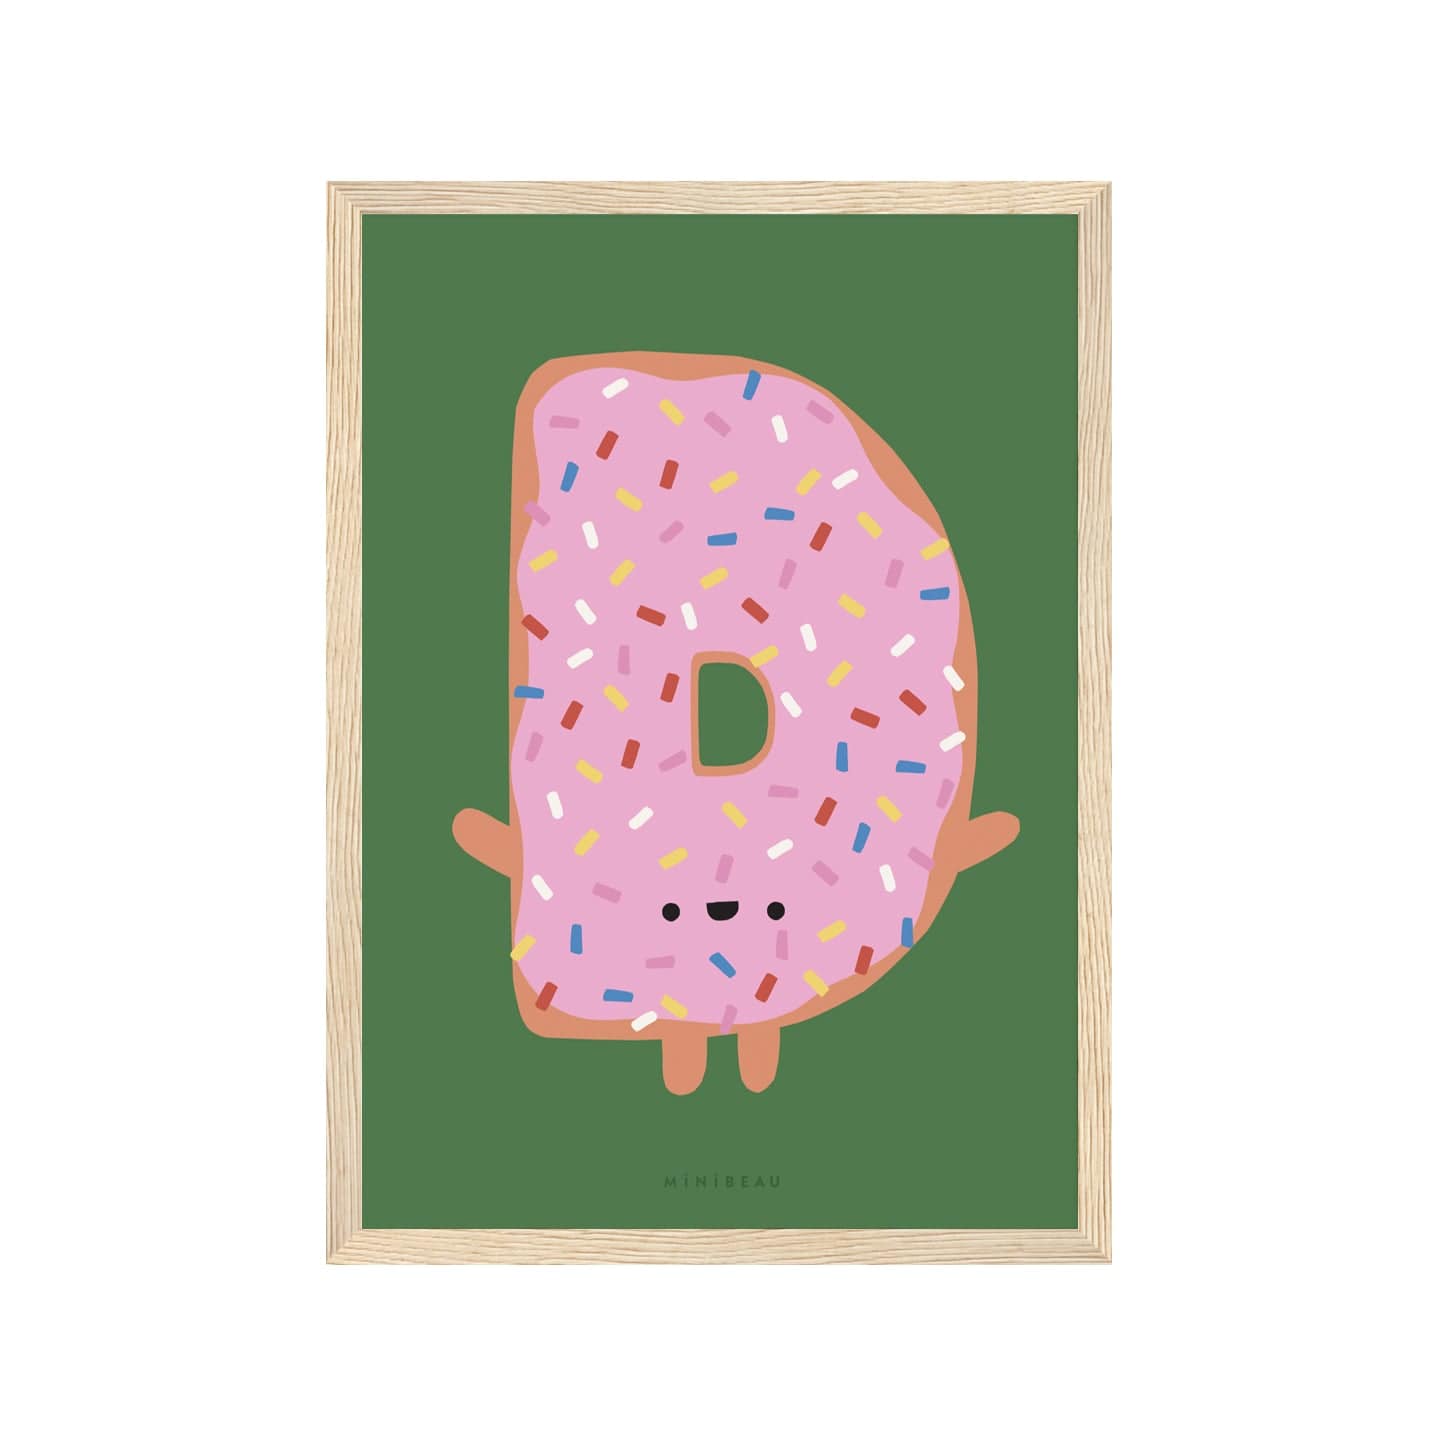 Art print in a light wood frame. Our Happy Alphabet 'D' Art Print shows a doughnut smiling iced doughnut in the shape of a D with short arms and legs. Icing is pink with multicoloured sprinkles and the print background is green.